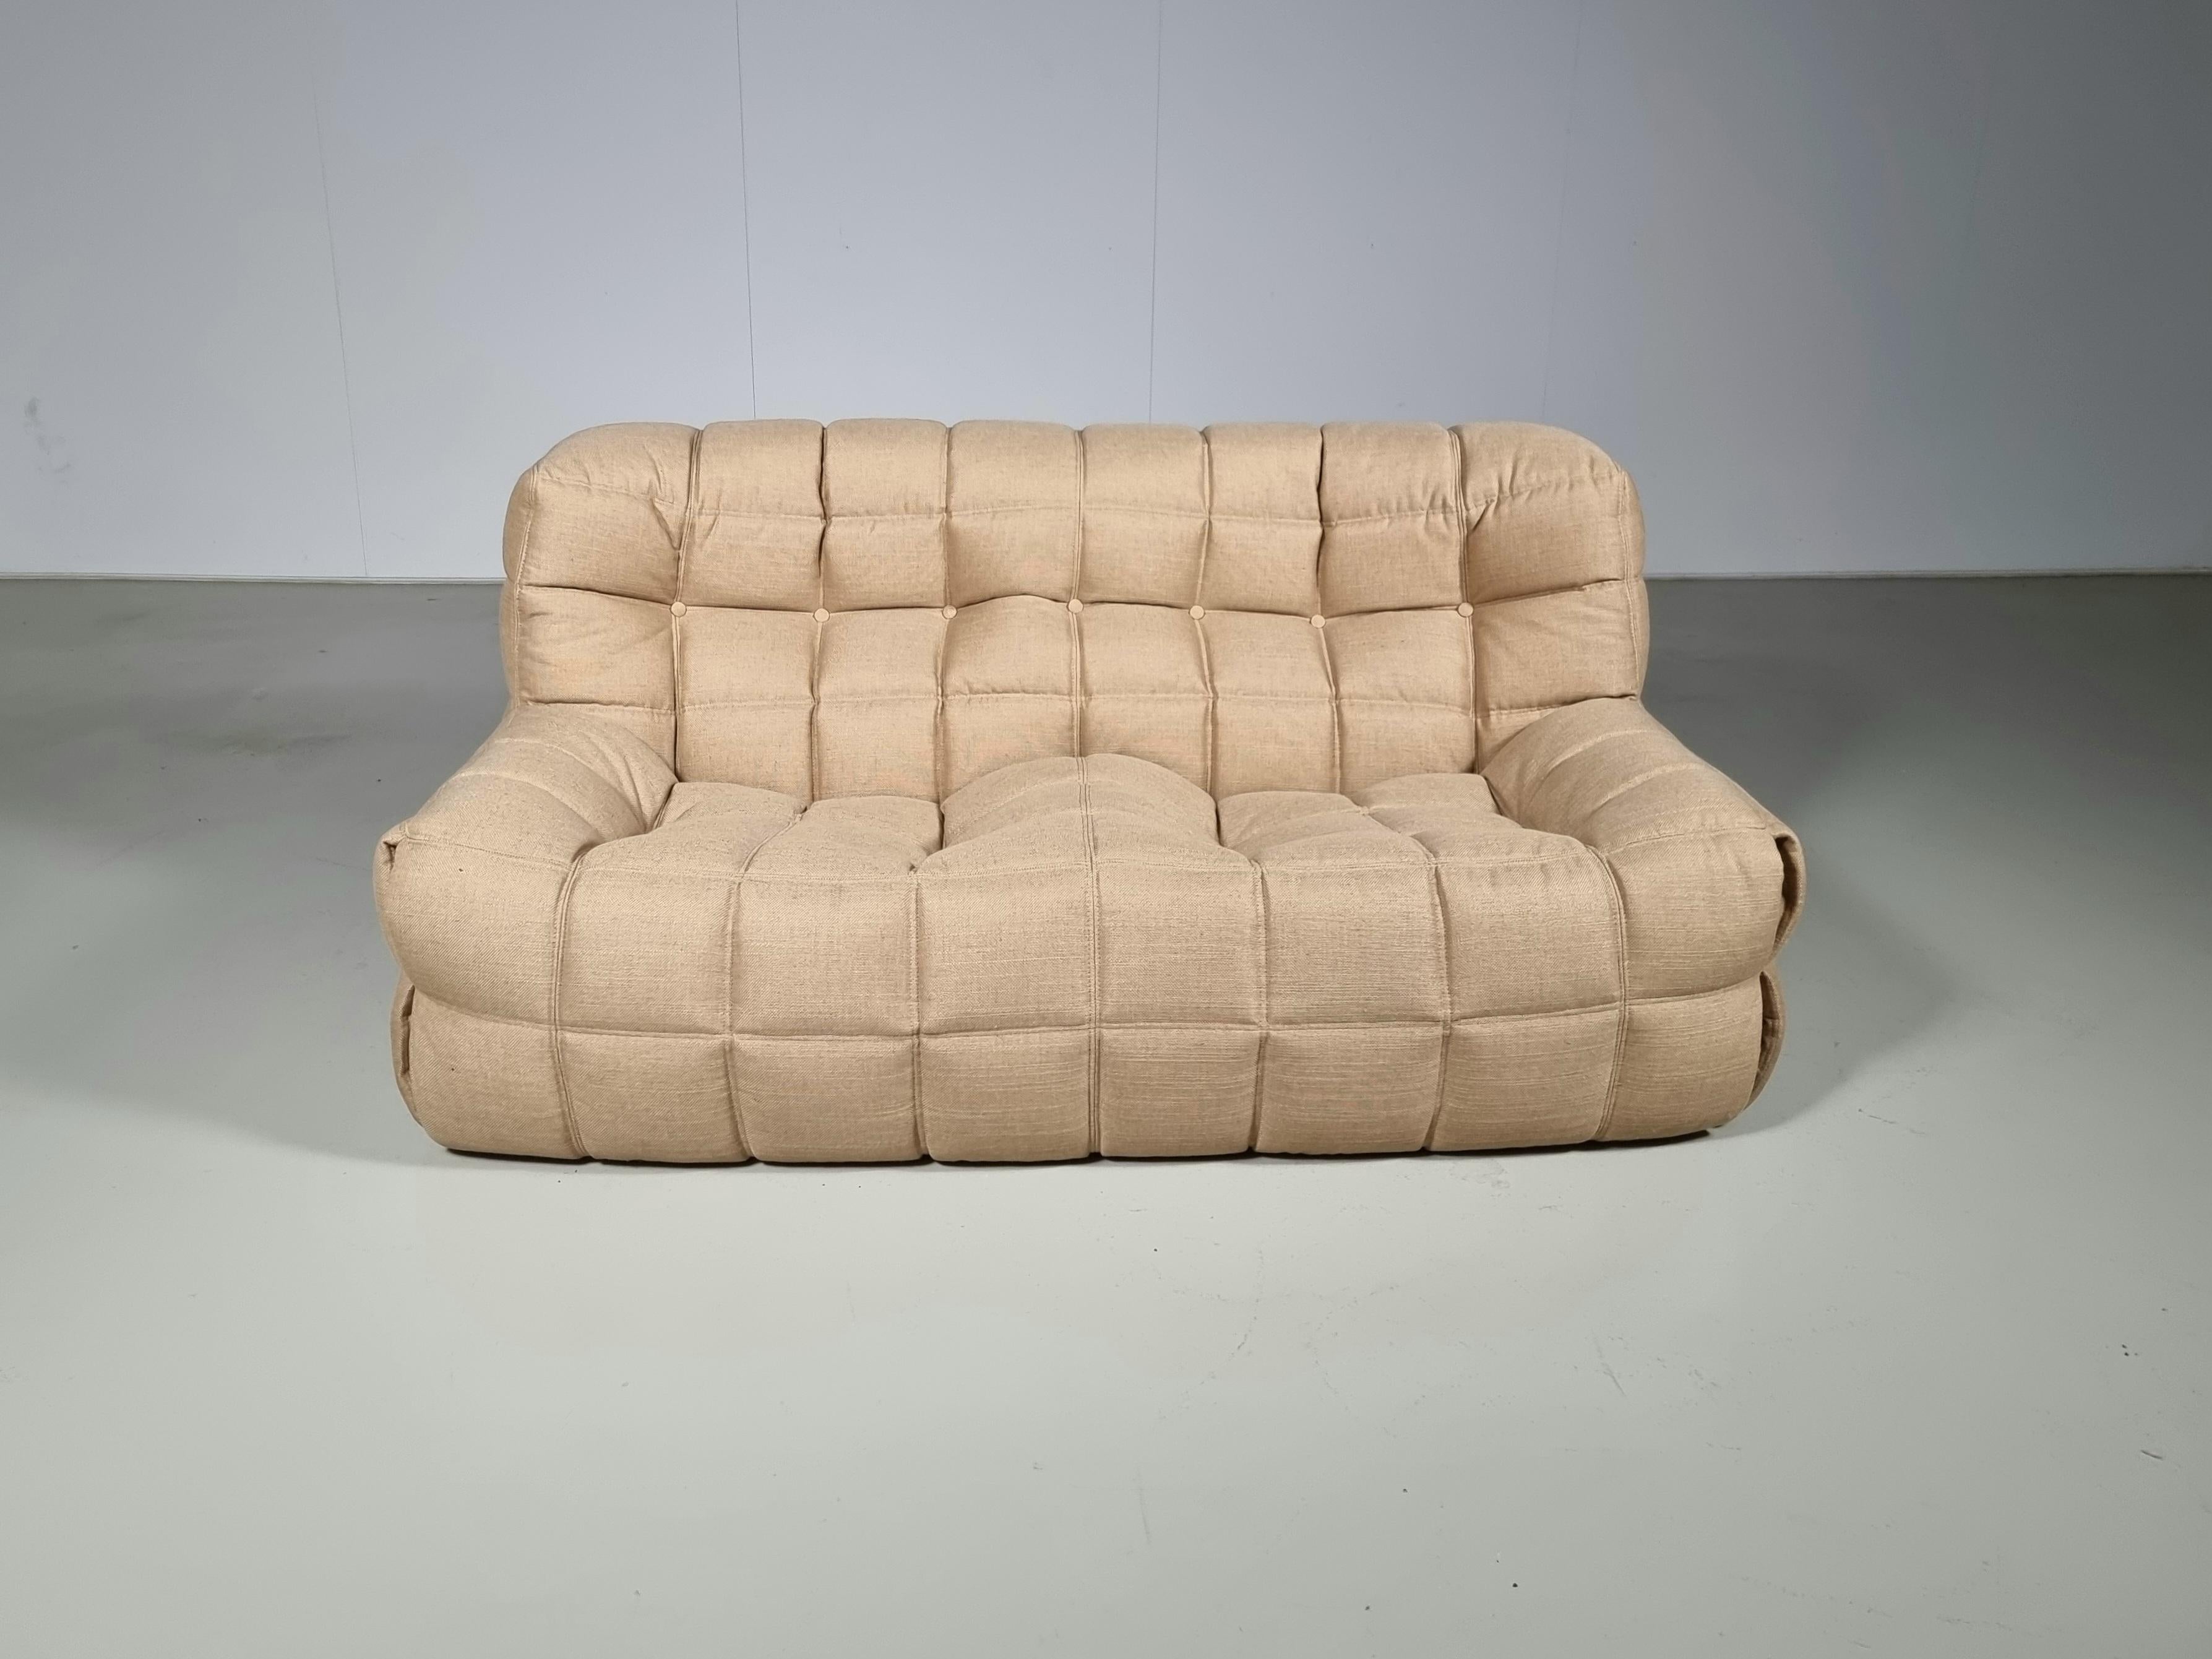 Kashima 2-seater sofa, Michel Ducaroy, Ligne Roset, 1970s

This sofa is an early production signed with Ligne Roset labels on the back and Ligne Roset logo fabric on the undersides

Designed to mimic floating clouds, the square stitched and